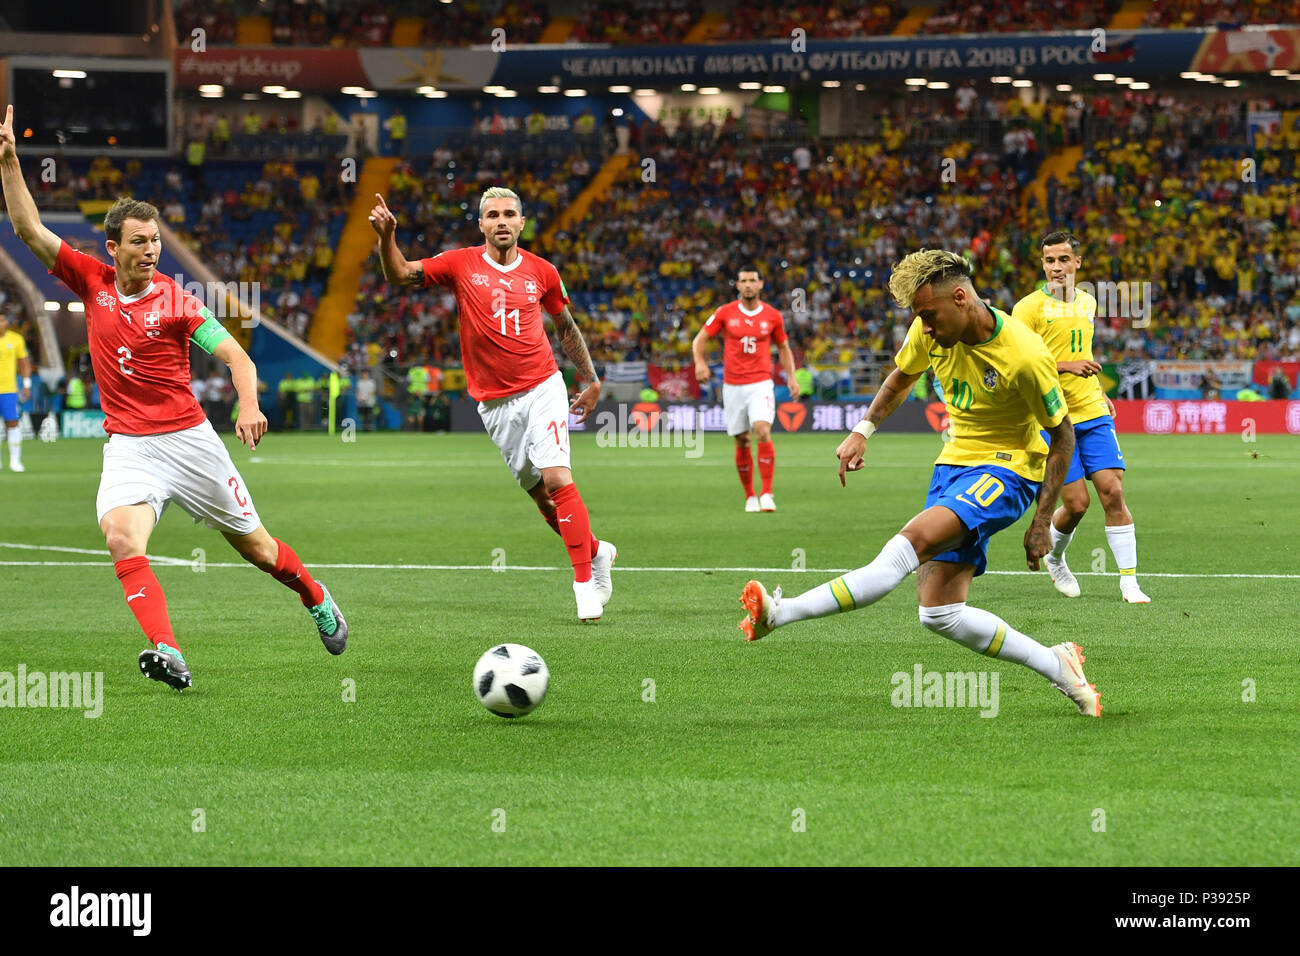 NEYMAR (BRA), action, duels versus Stephan LICHTSTEINER (SUI) and Valon BEHRAMI (SUI), area scene. Brazil (BRA) -Switzerland (SUI) 1-1, Preliminary Round, Group E, match 09, on 17.06.2018 in Rostov-on-Don, Rostov Arena. Football World Cup 2018 in Russia from 14.06. - 15.07.2018. | usage worldwide Stock Photo